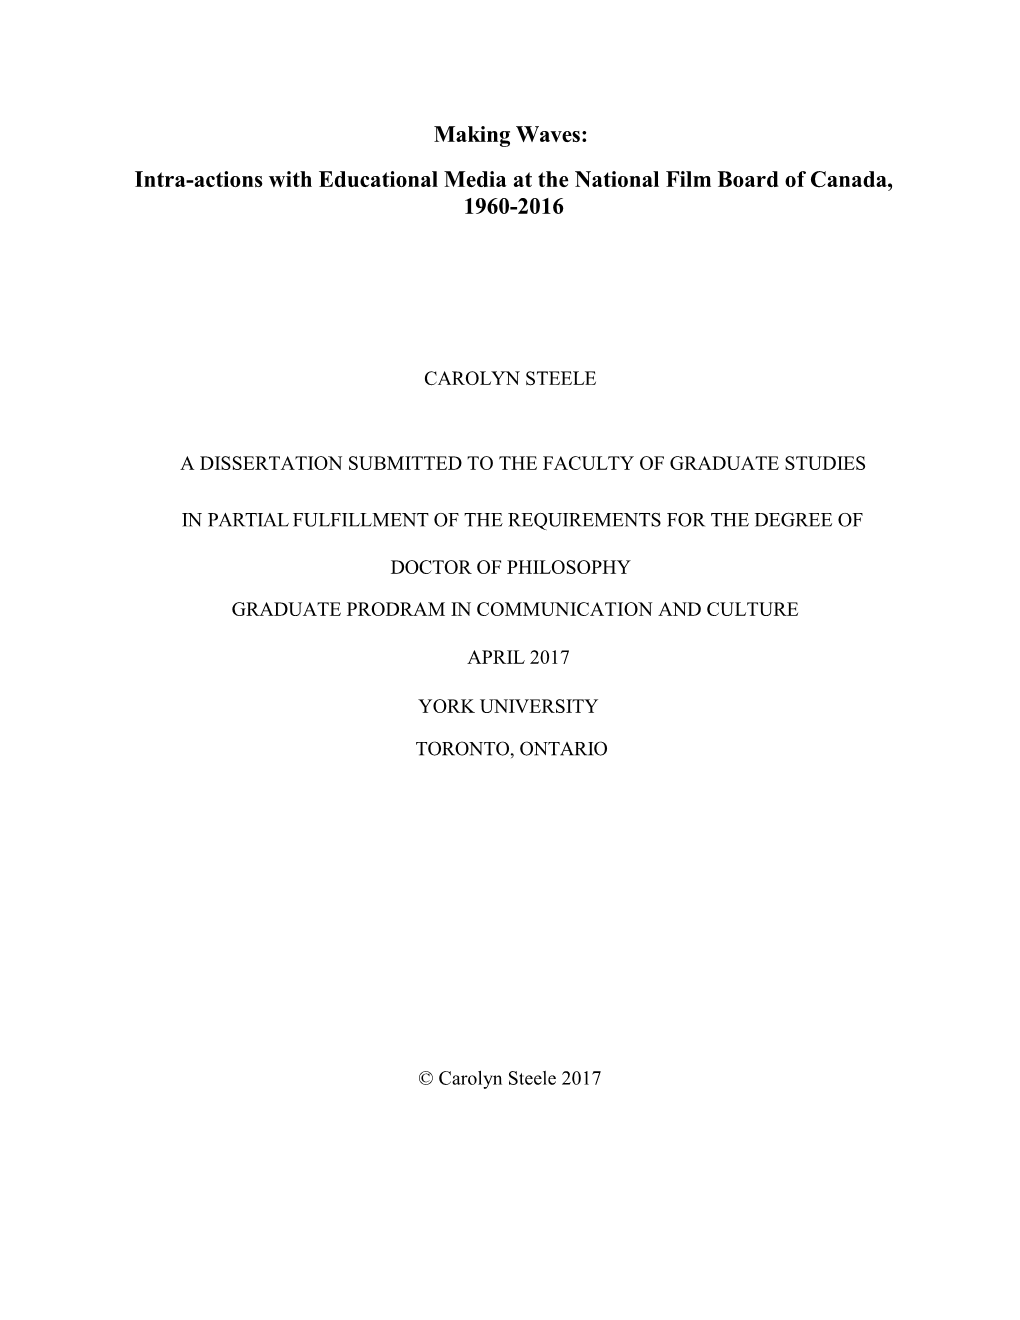 Intra-Actions with Educational Media at the National Film Board of Canada, 1960-2016